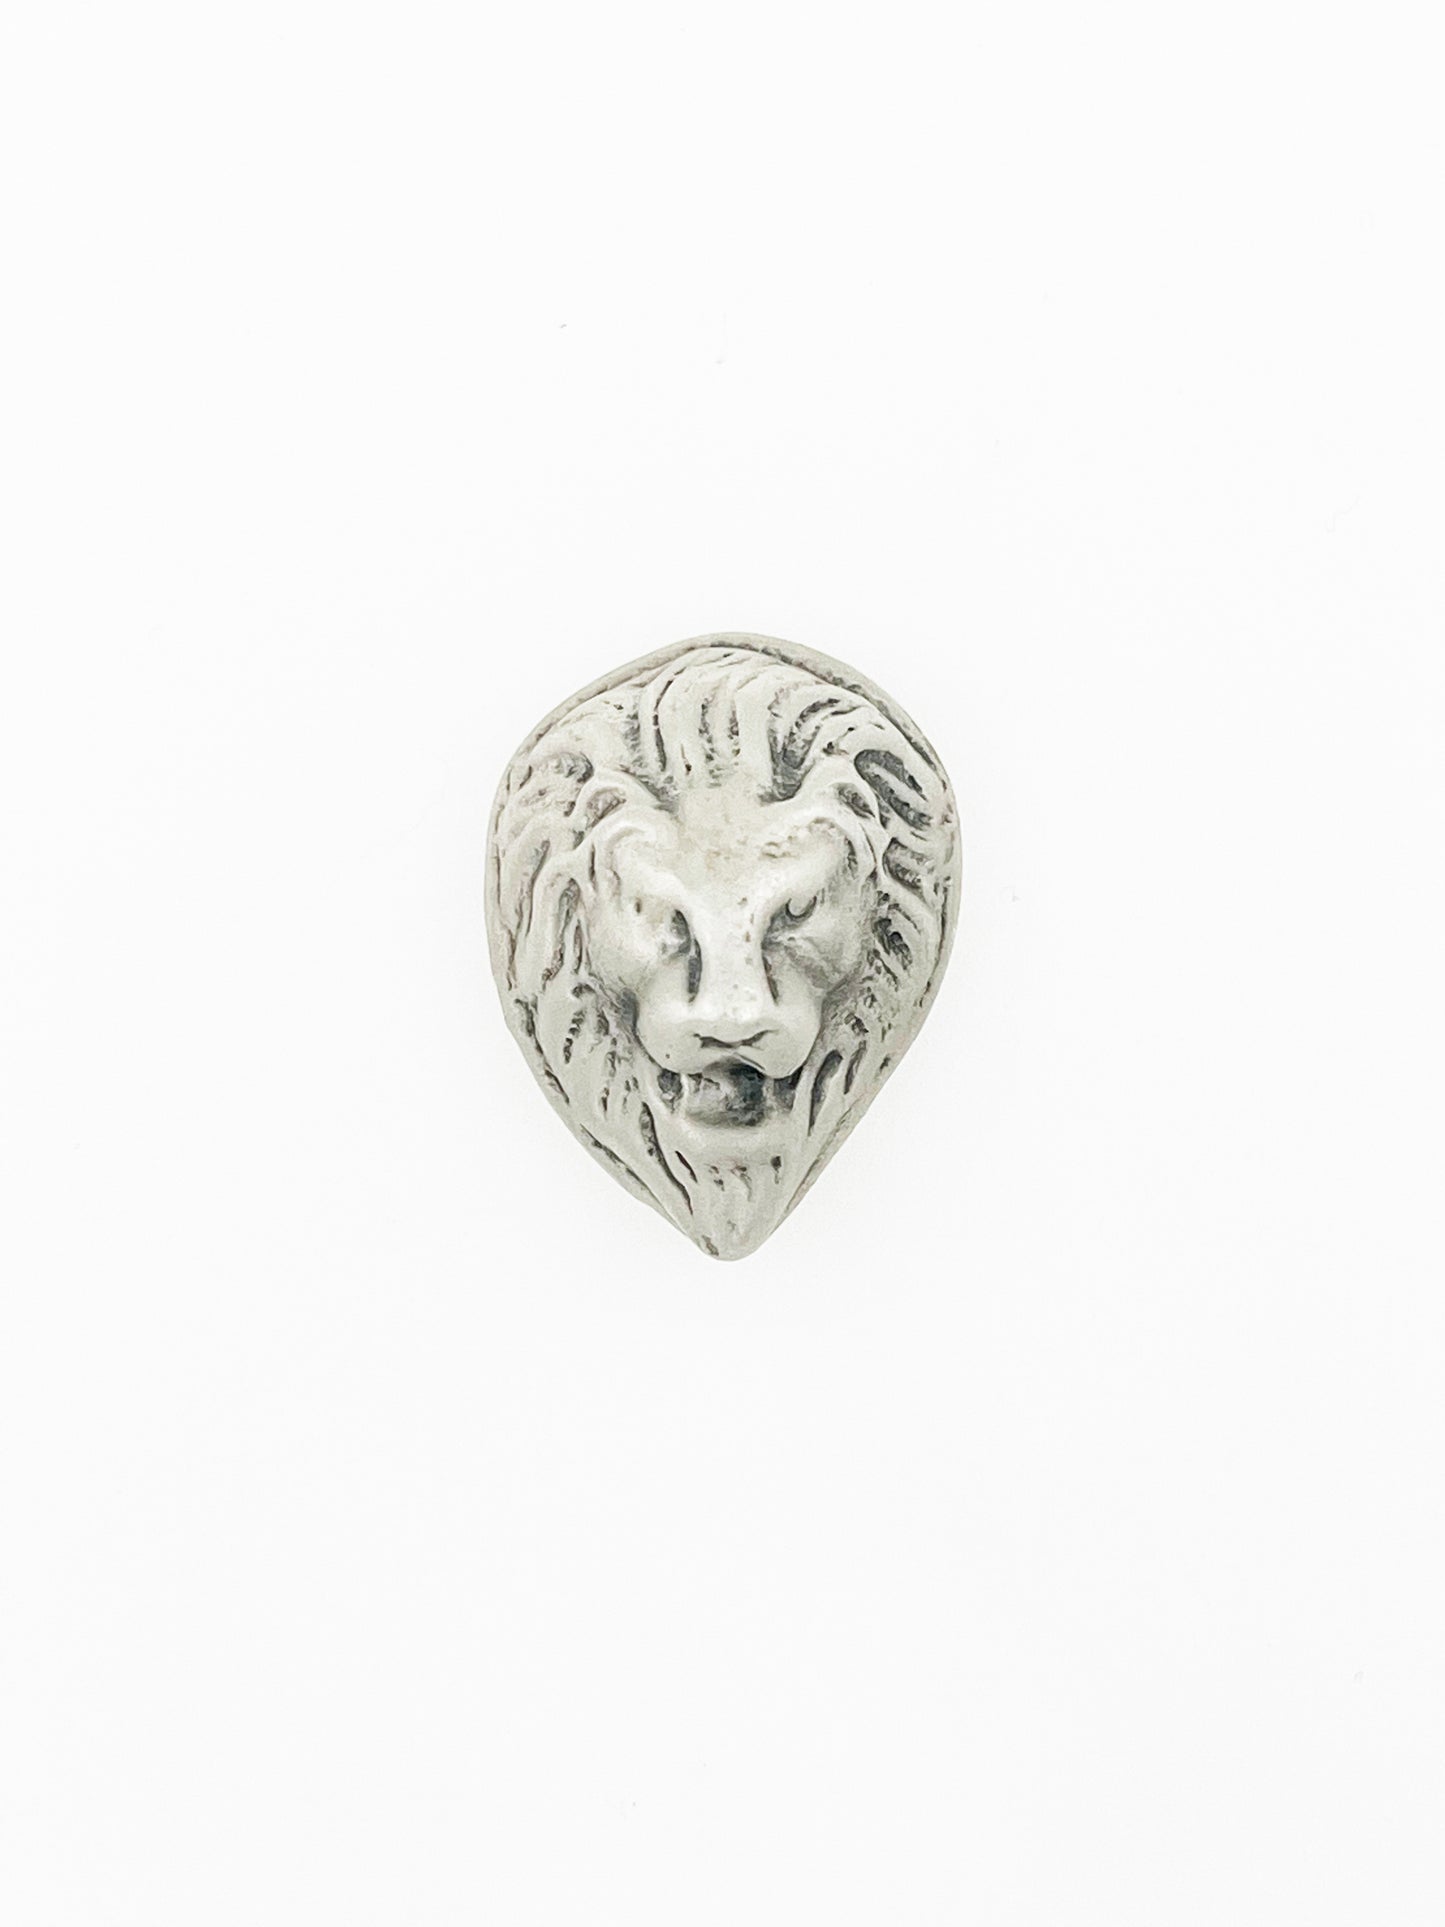 Bison Bullion Hand Poured Lion Head Troy Ounce in .999 silver